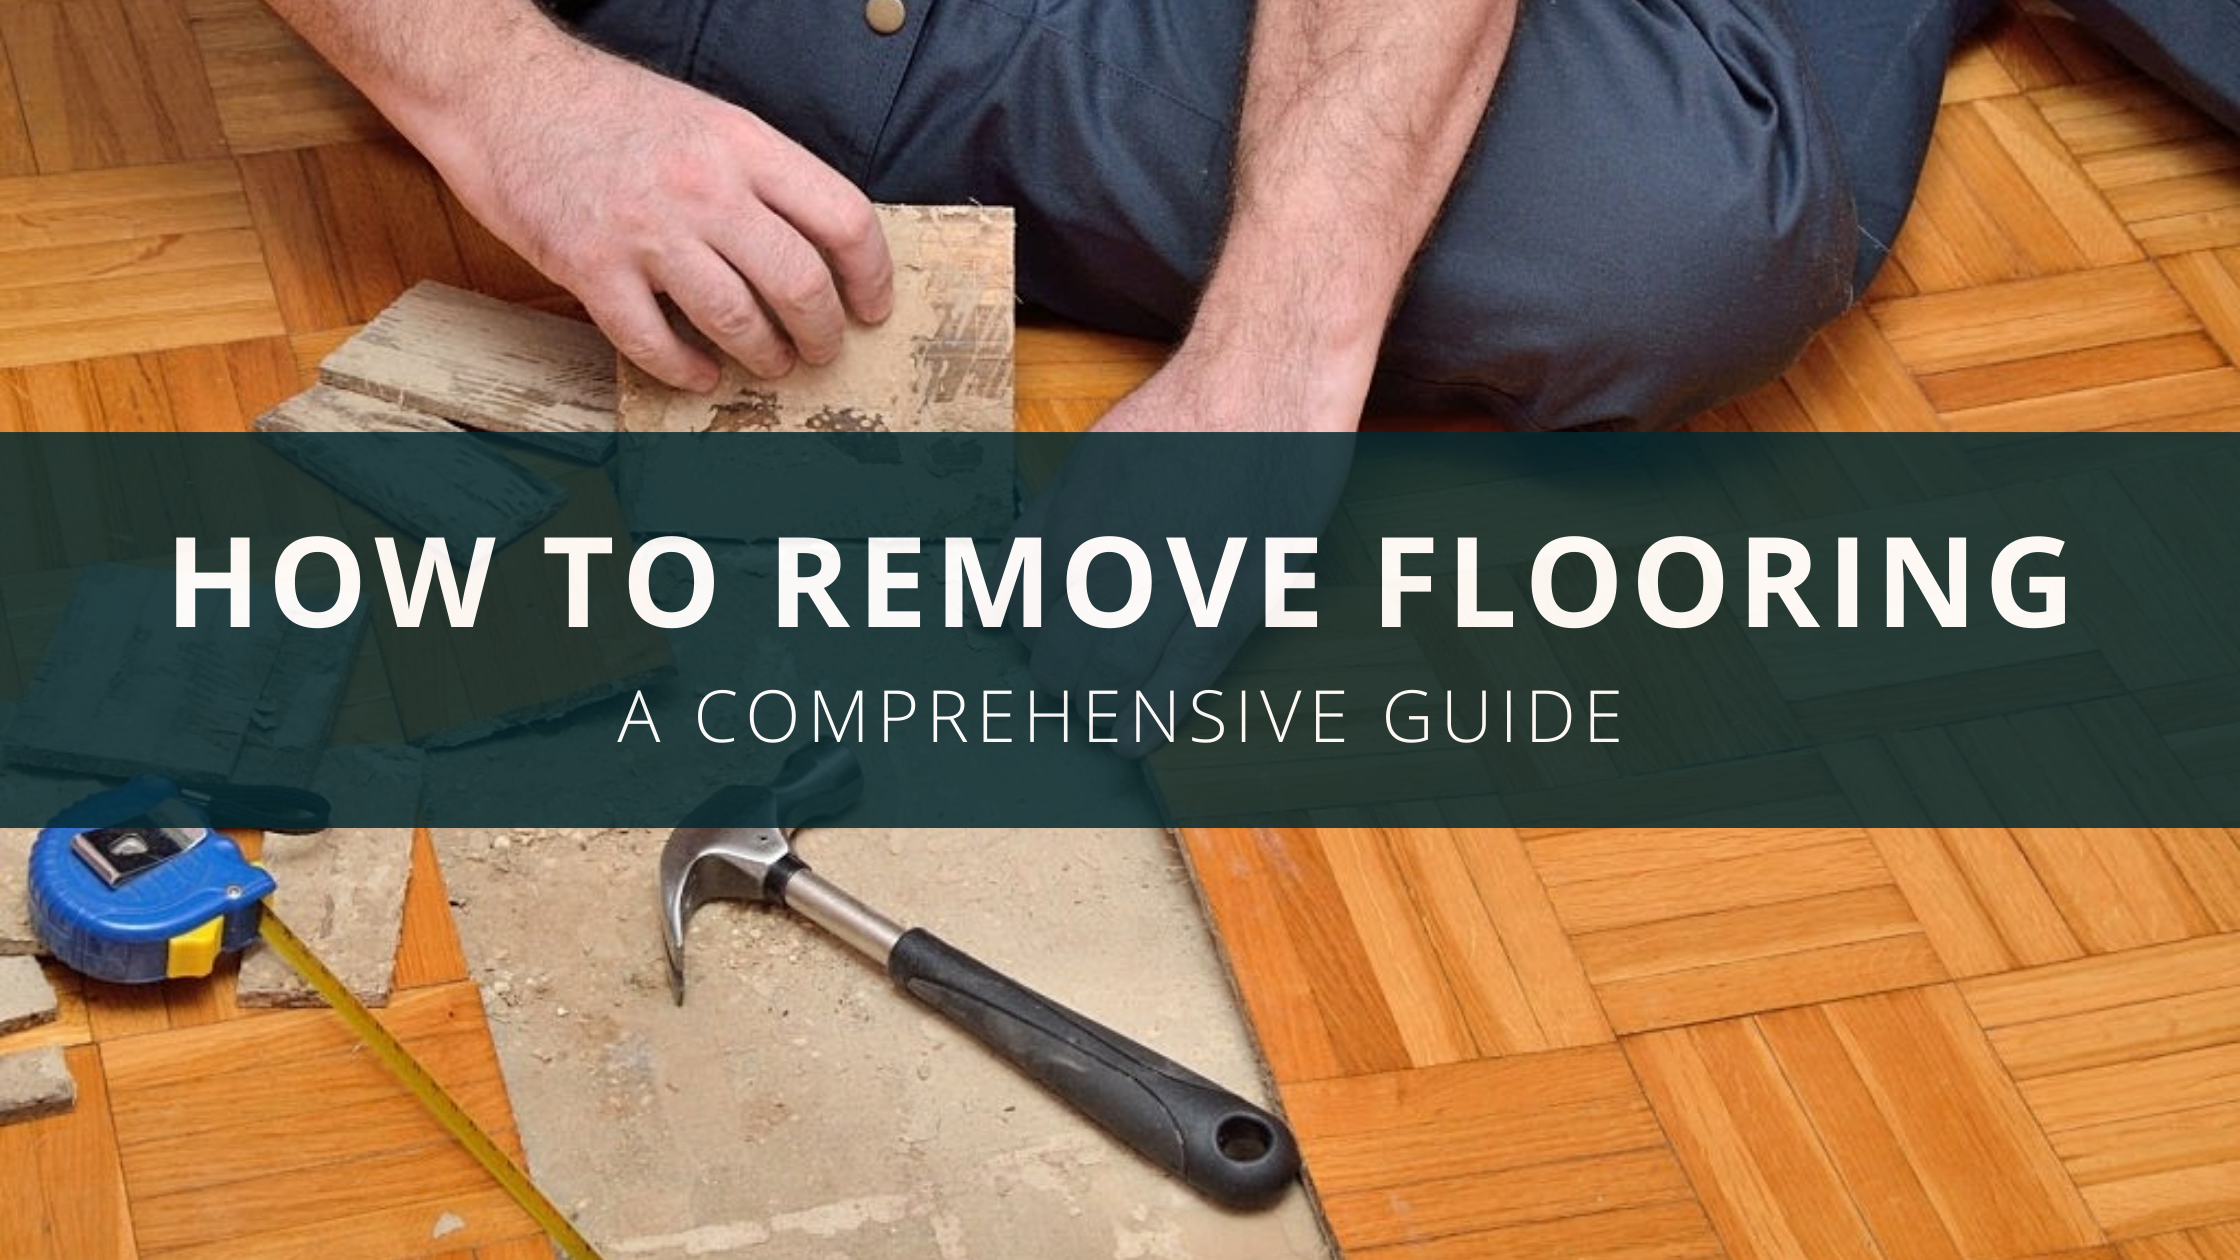 How to Clean Vinyl Plank Floor with the Right Equipment and Methods